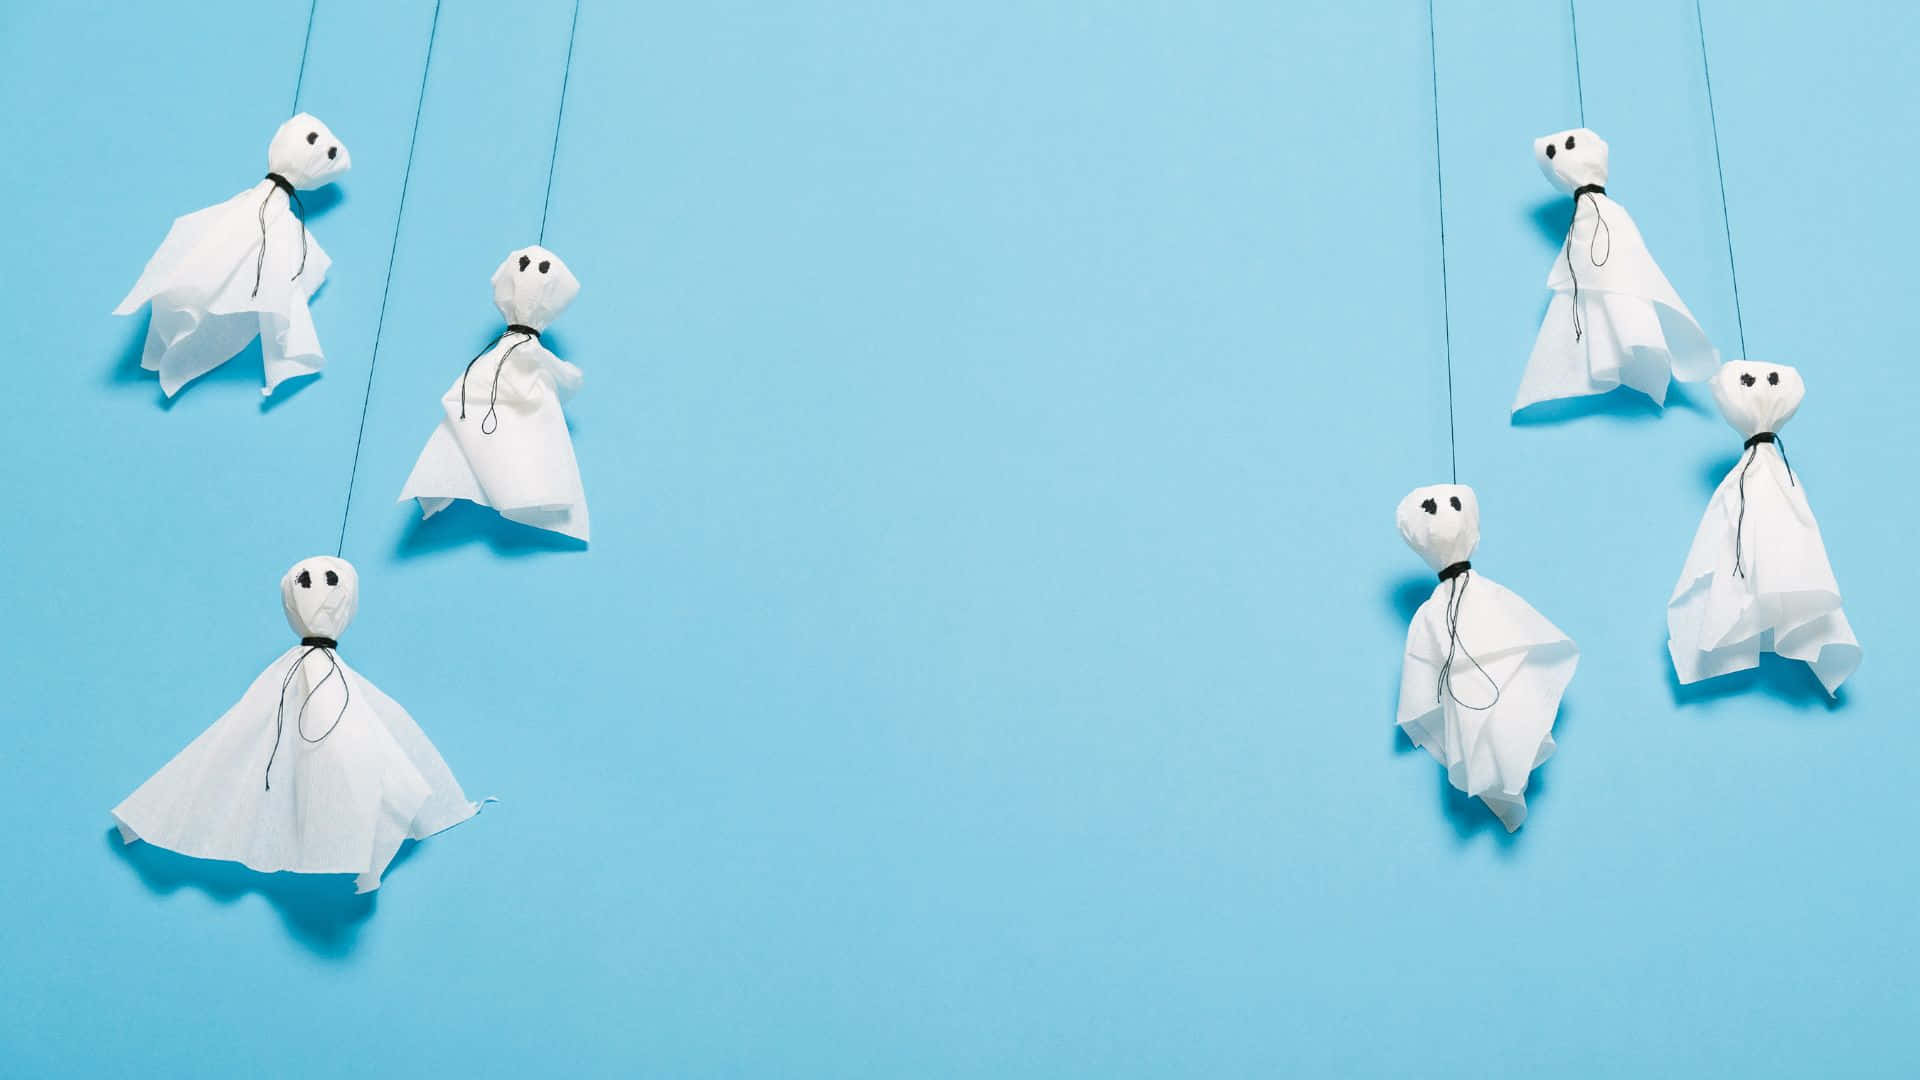 “Spook Up Your House This Halloween With These Creative Crafts!” Wallpaper